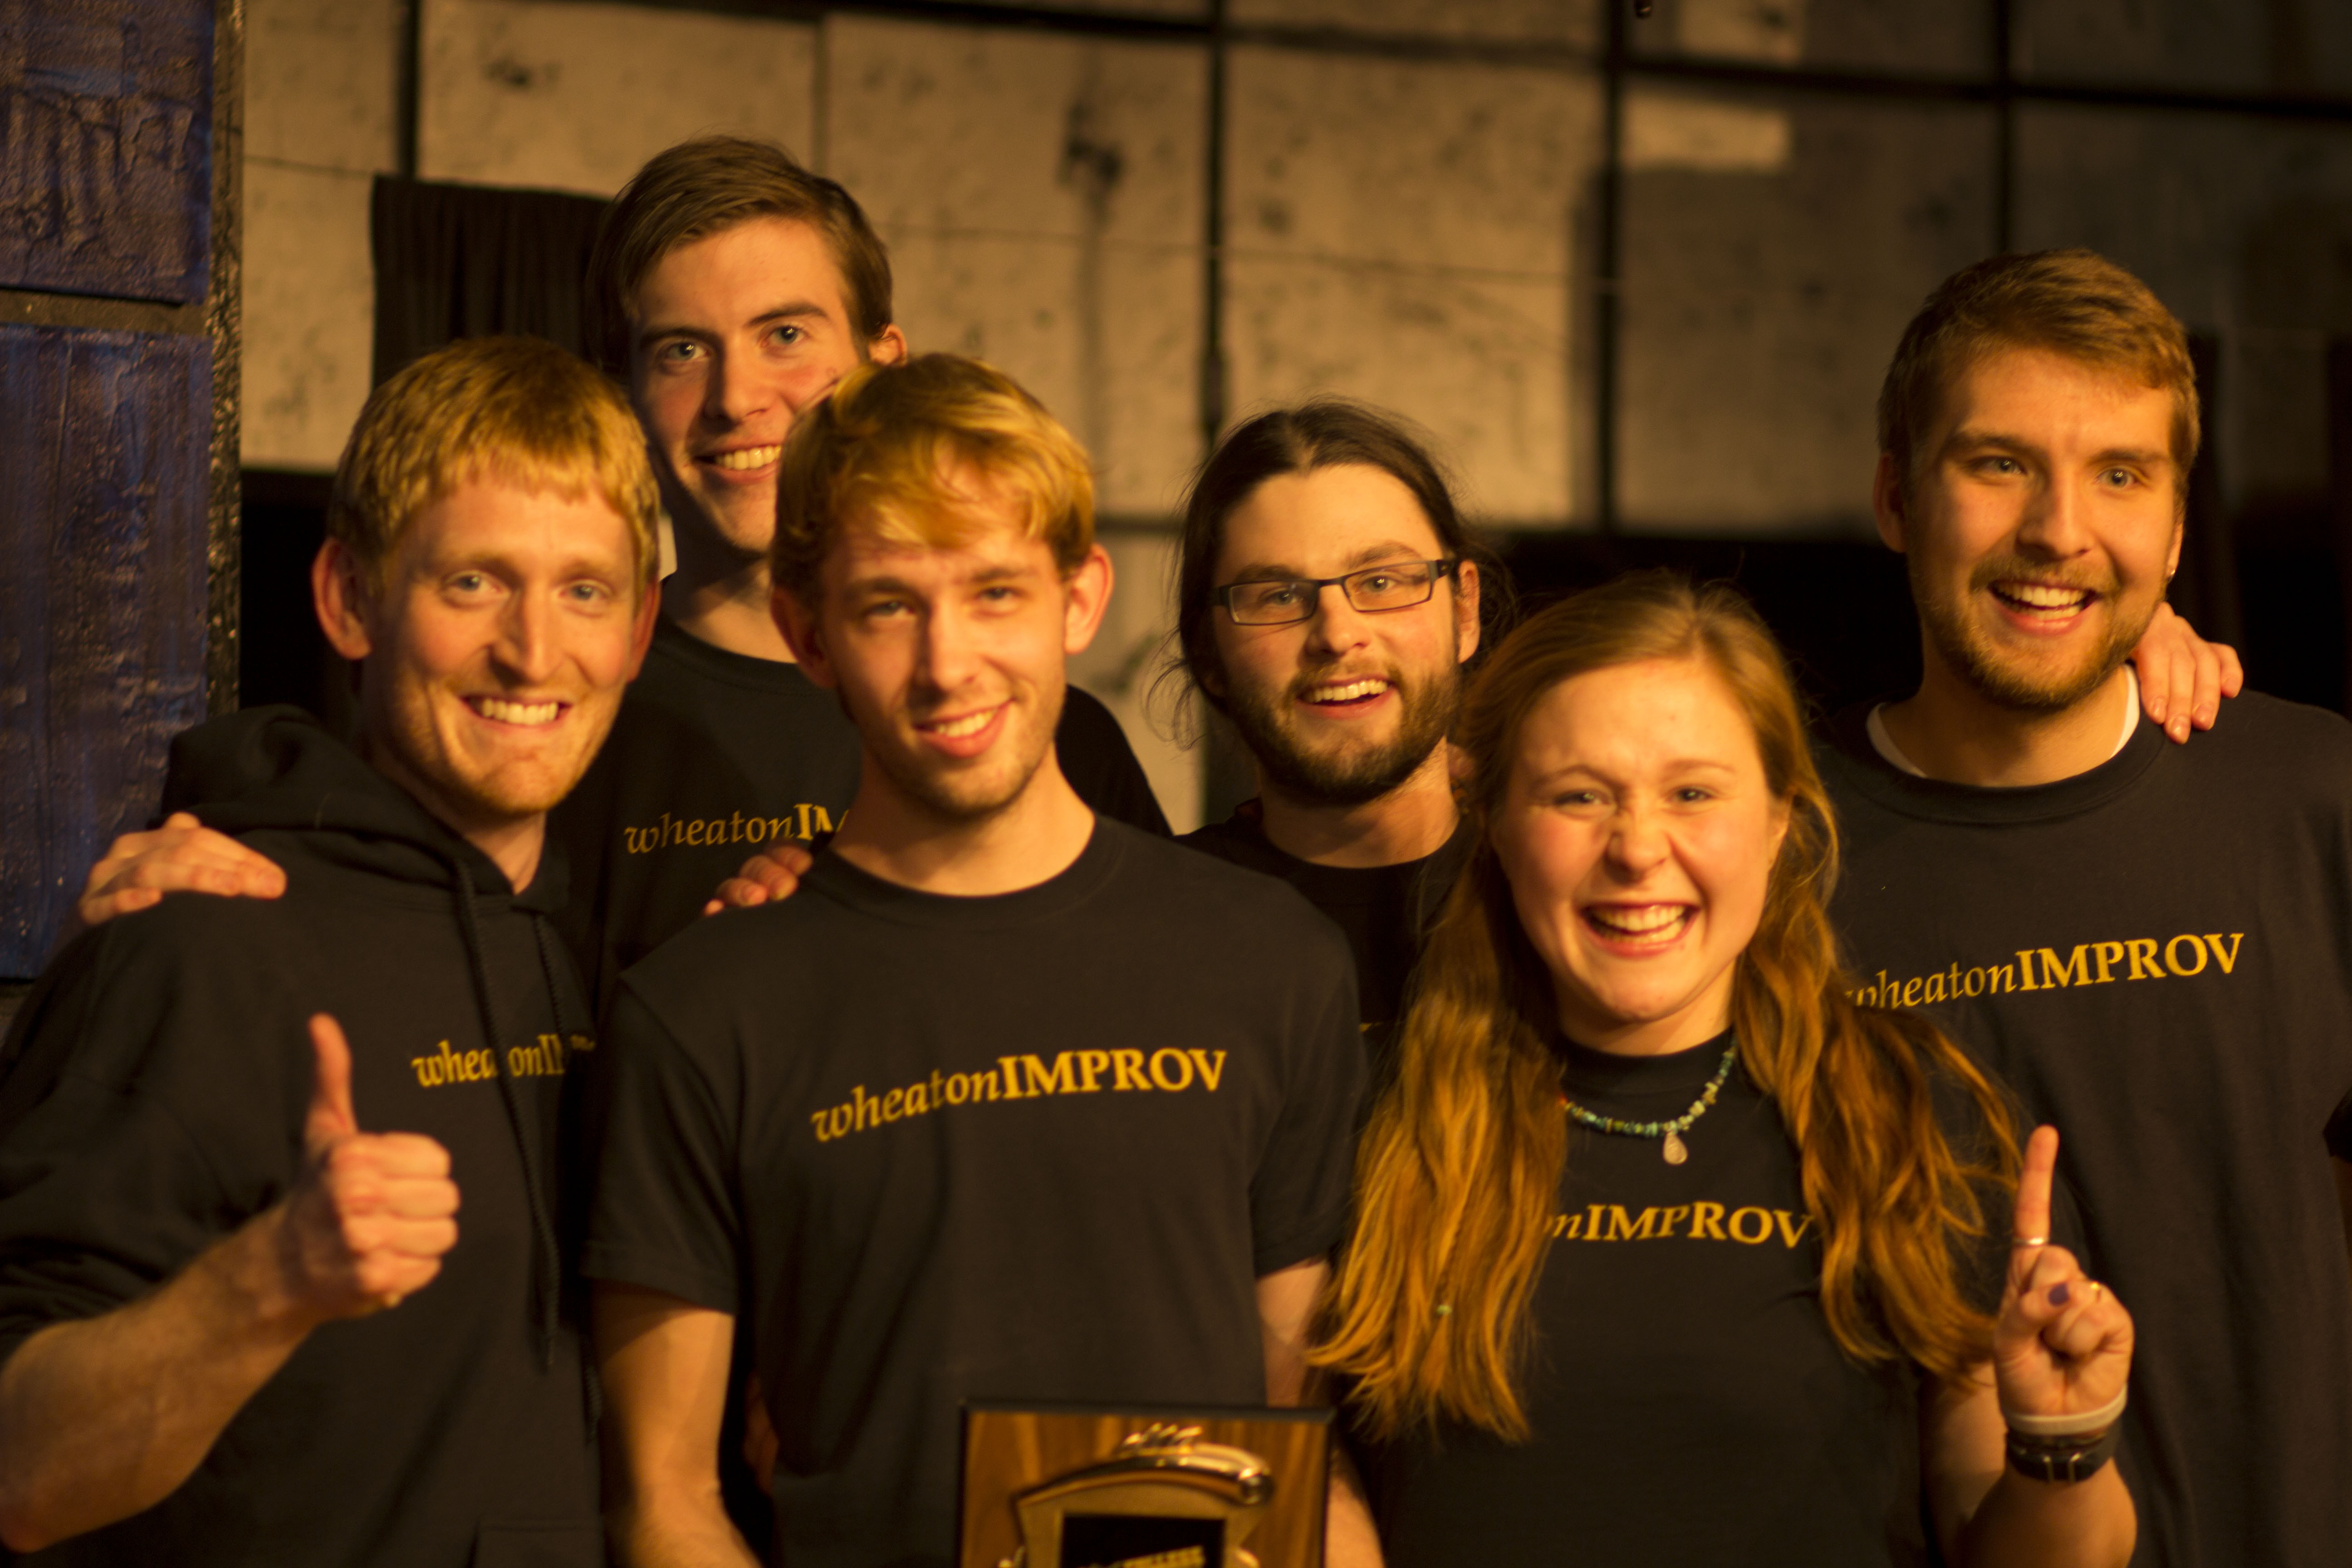 America’s 16 Funniest College Improv Teams Clash for National Title